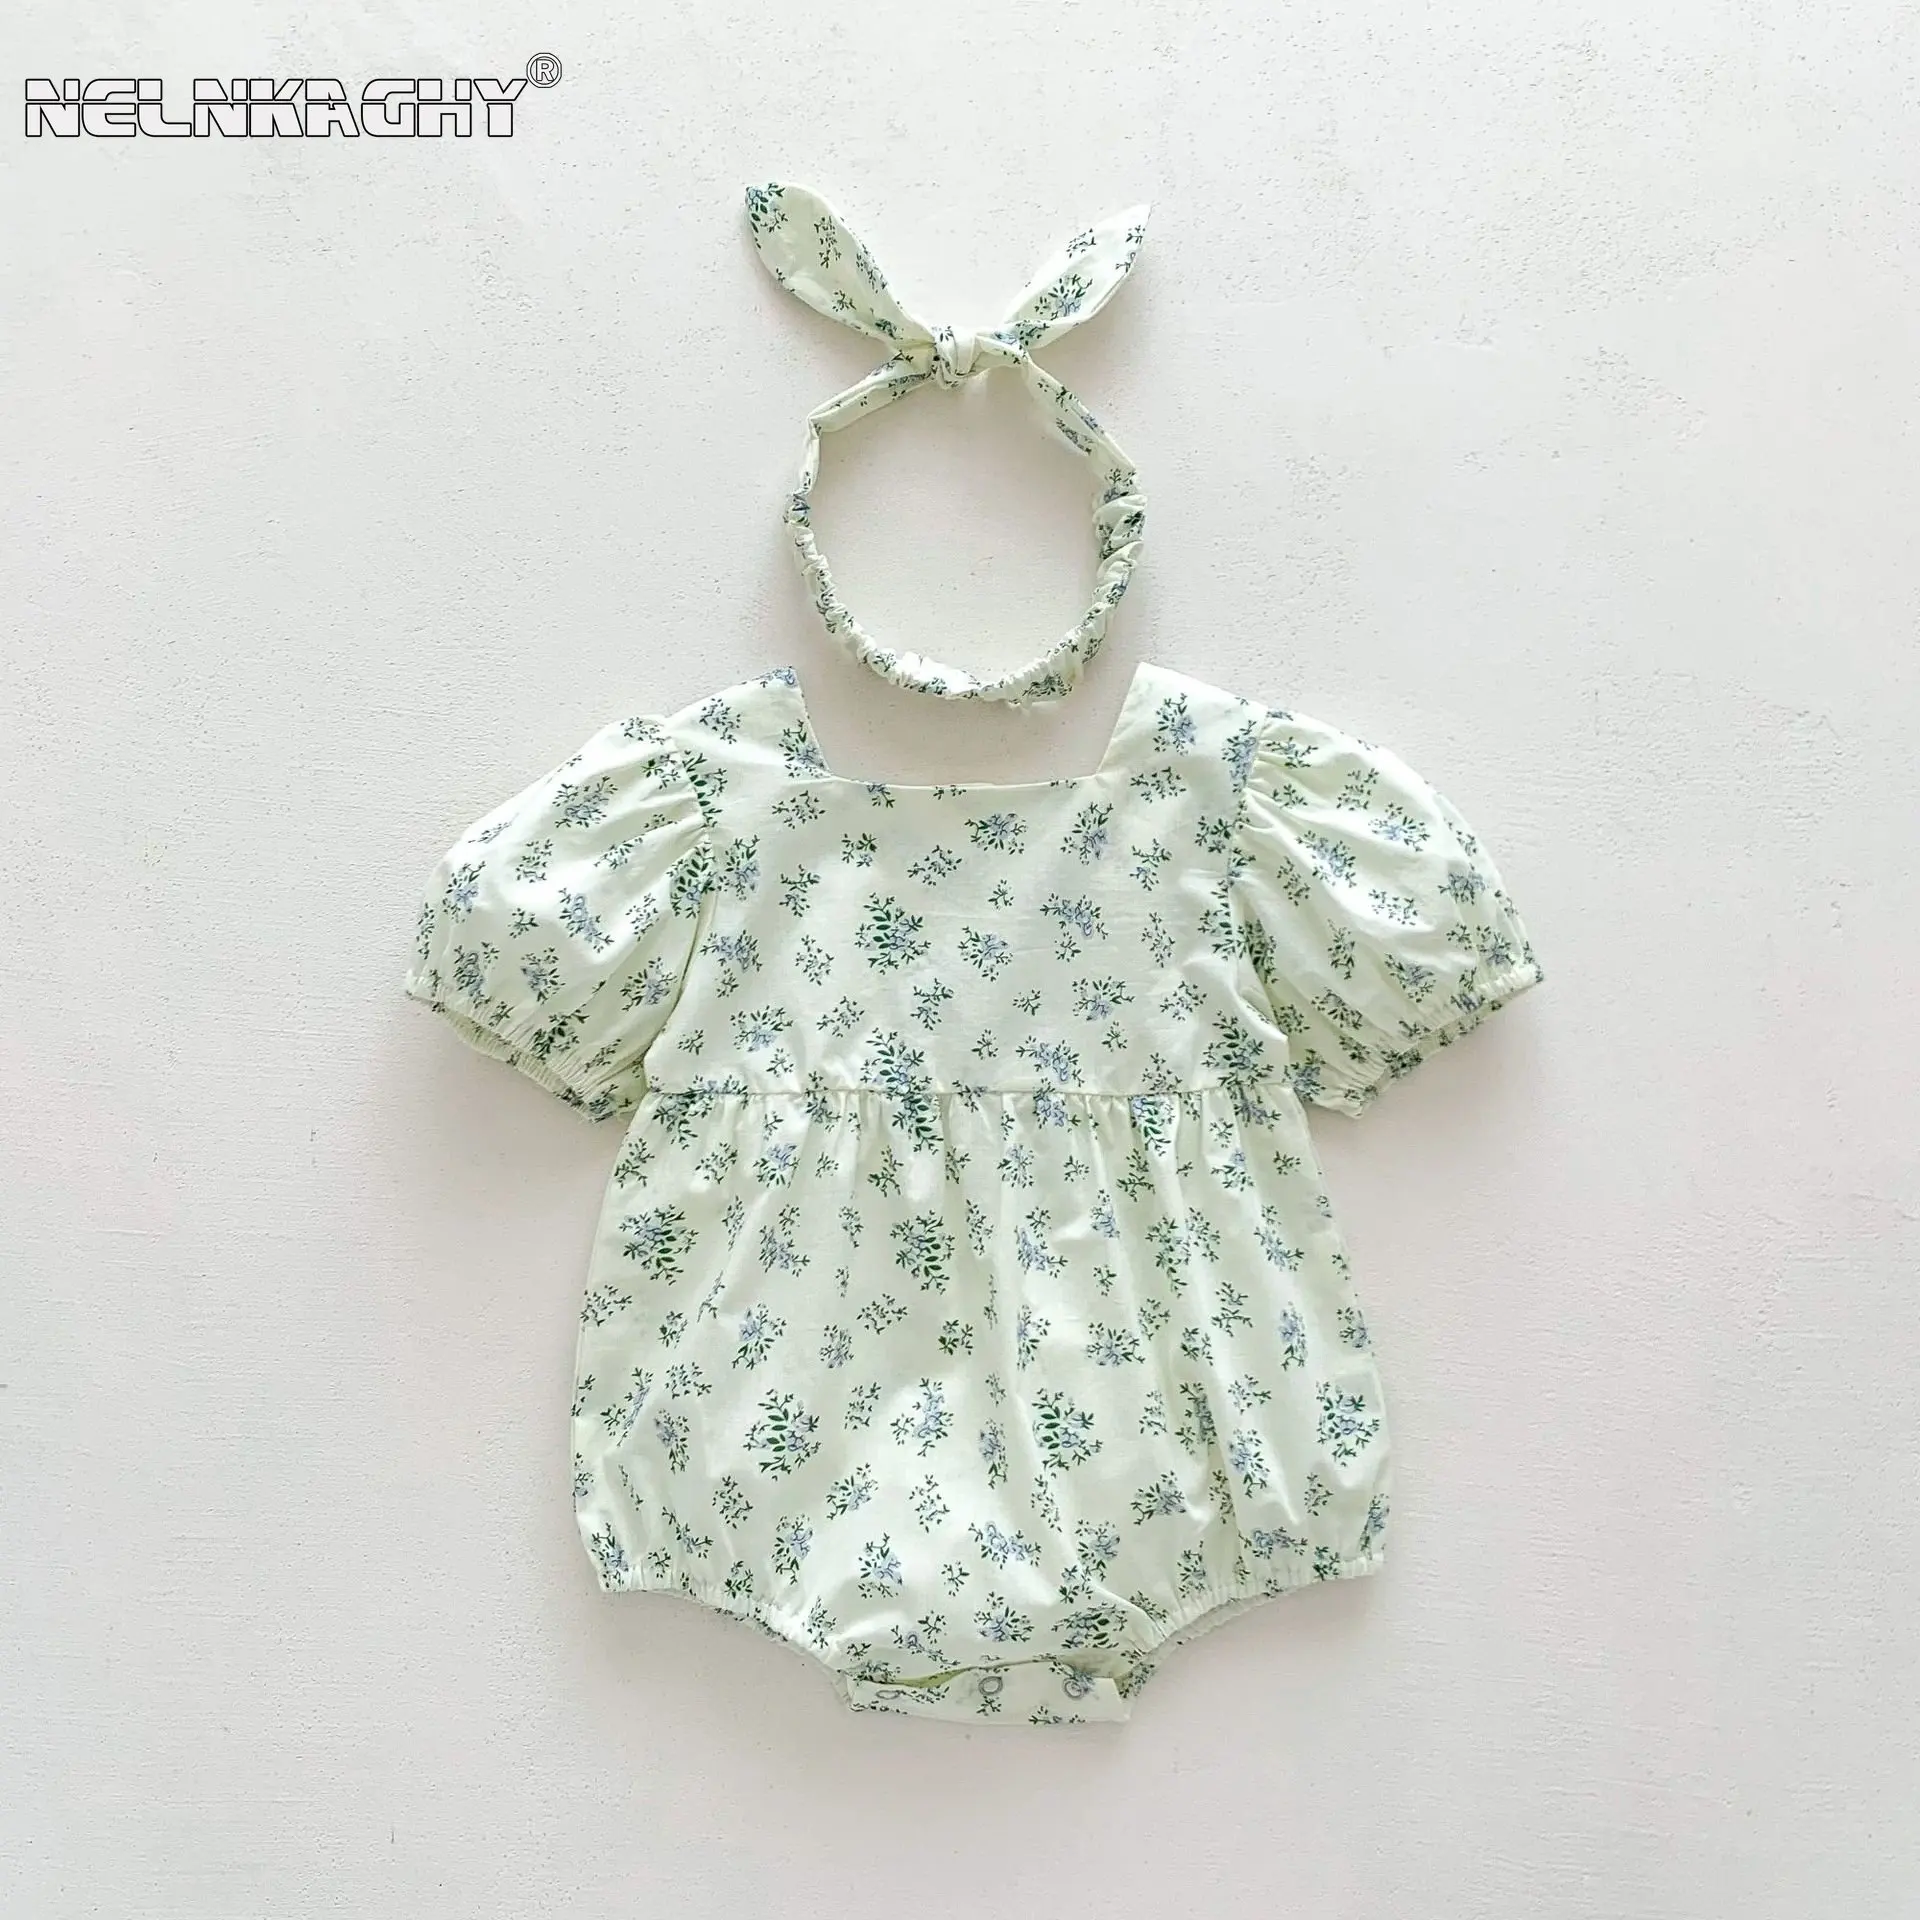 2023 new in summer newborn infant girls short sleeve floral cotton outdoor clothing kids baby jumpsuits bodysuits gift headbands